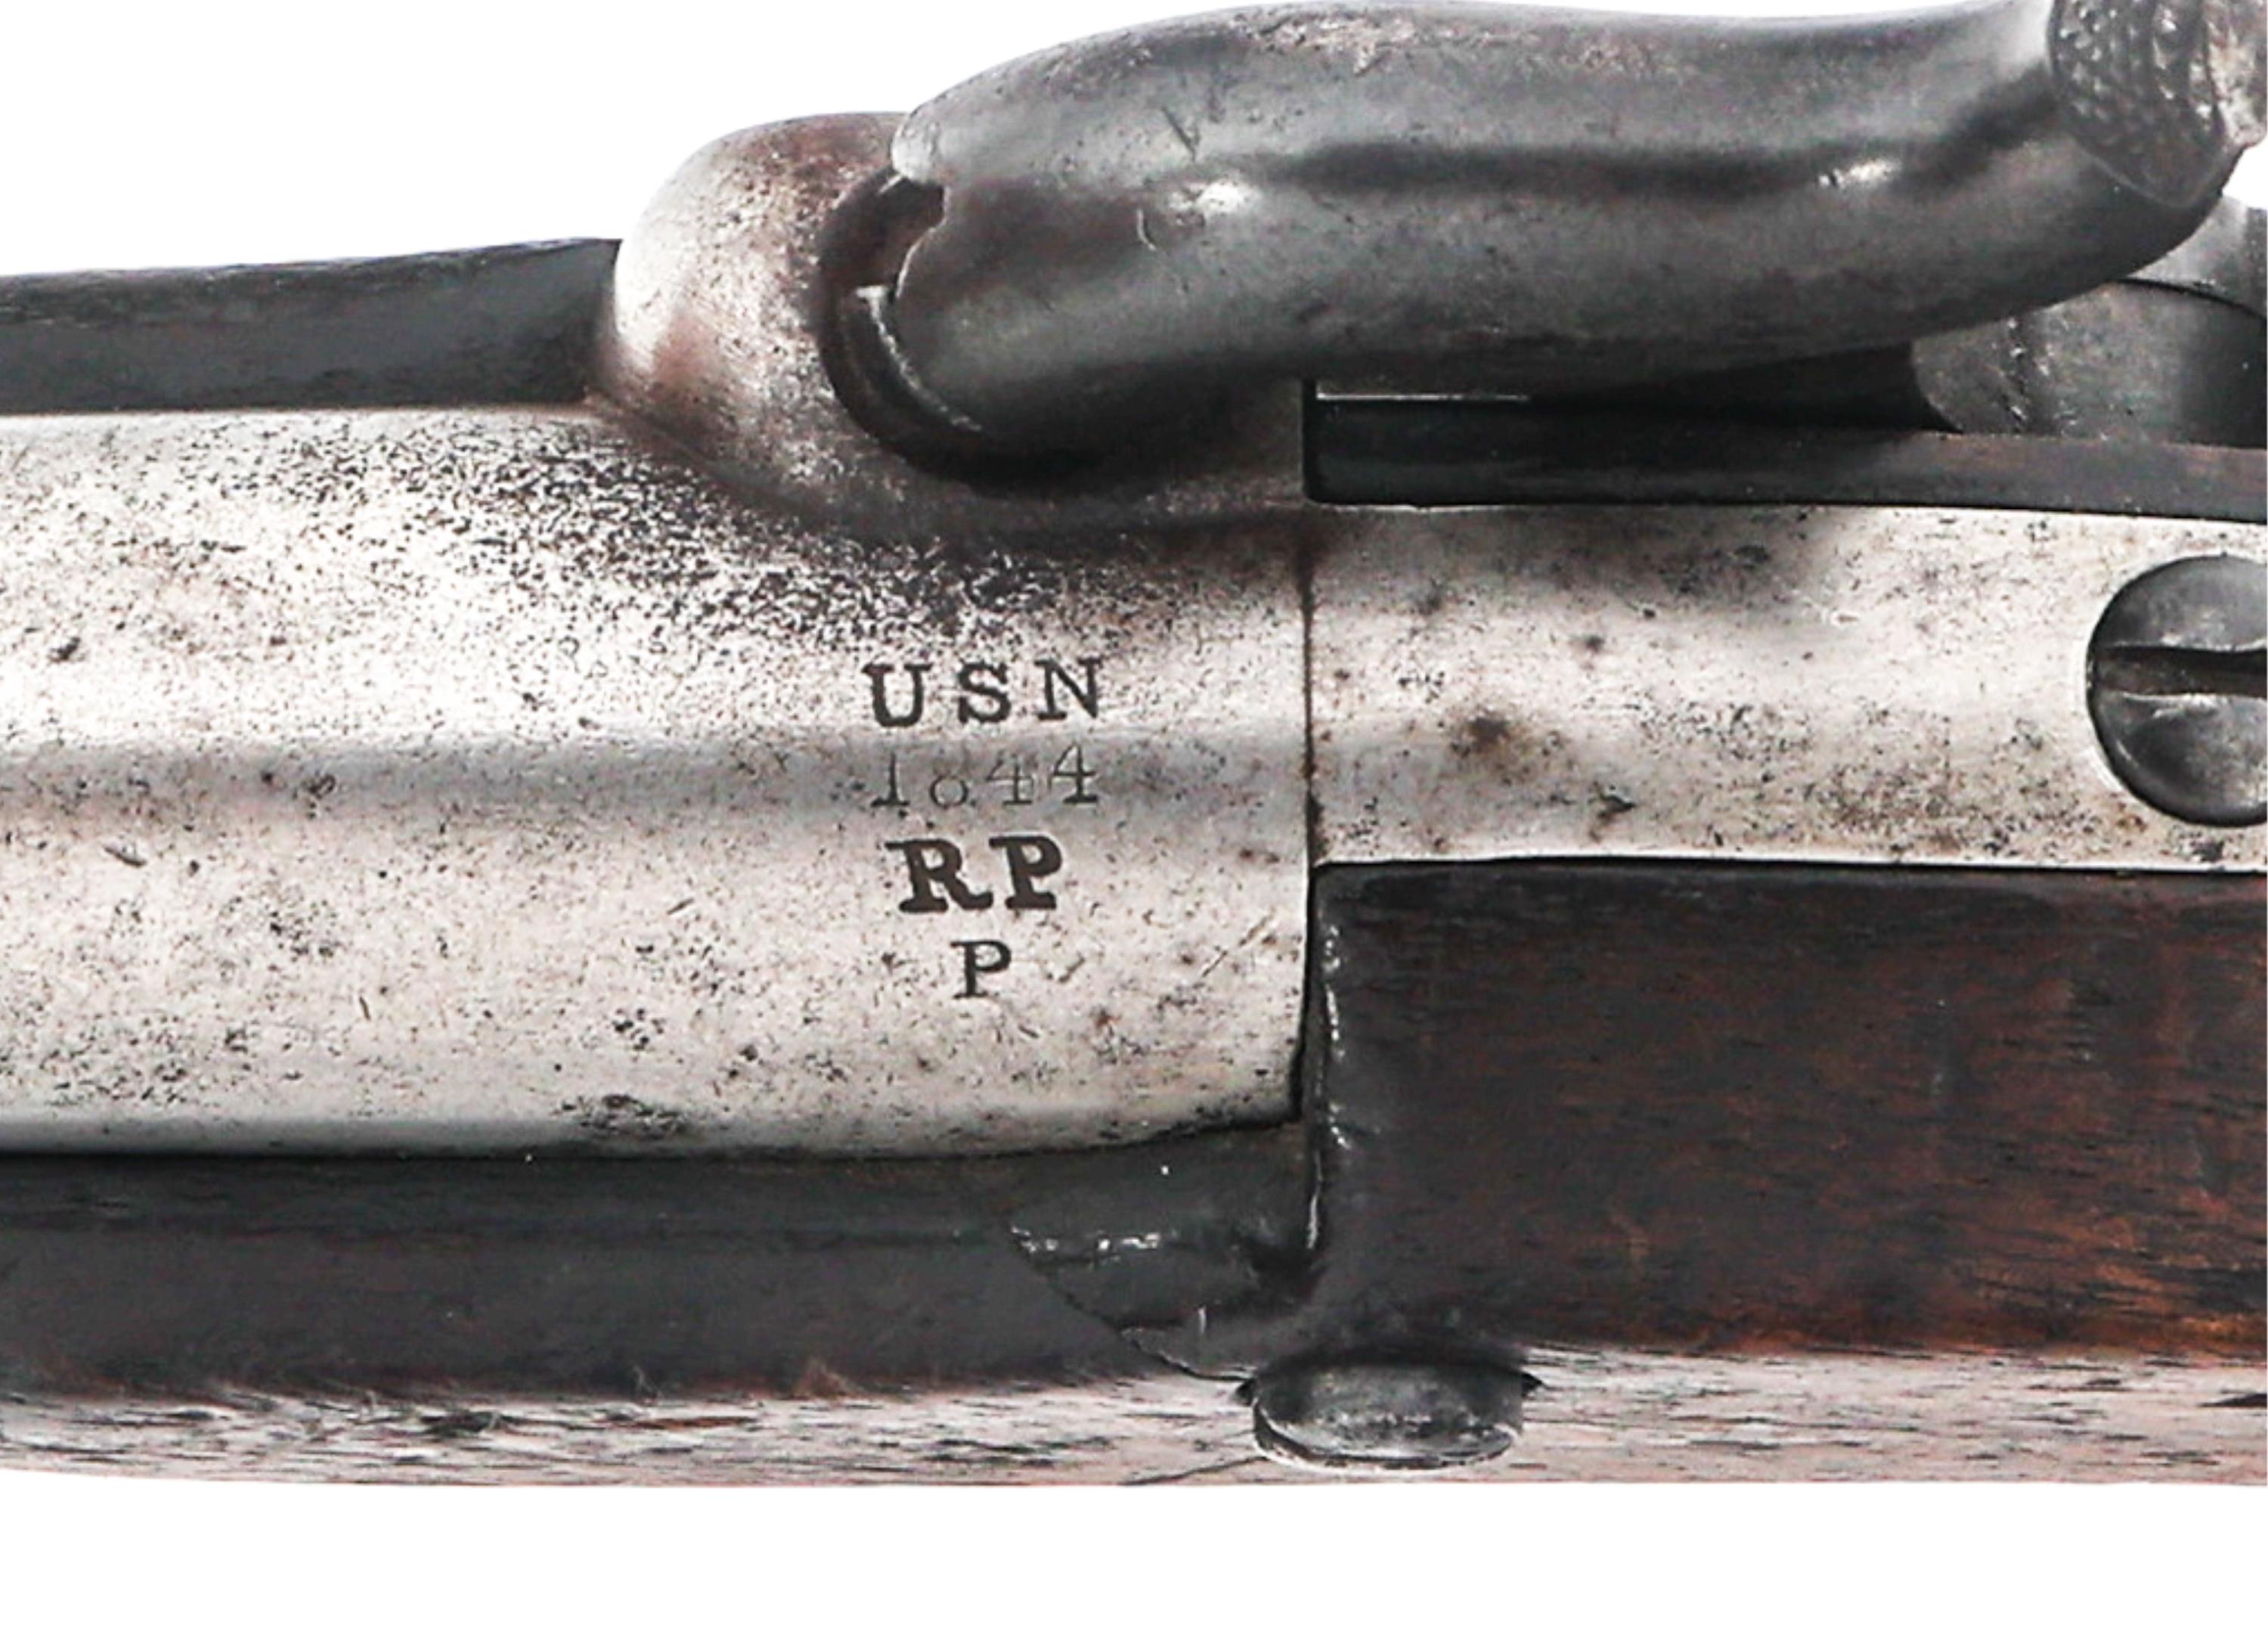 1844 N.P. AMES 1842 .54 CAL NAVY PERCUSSION PISTOL